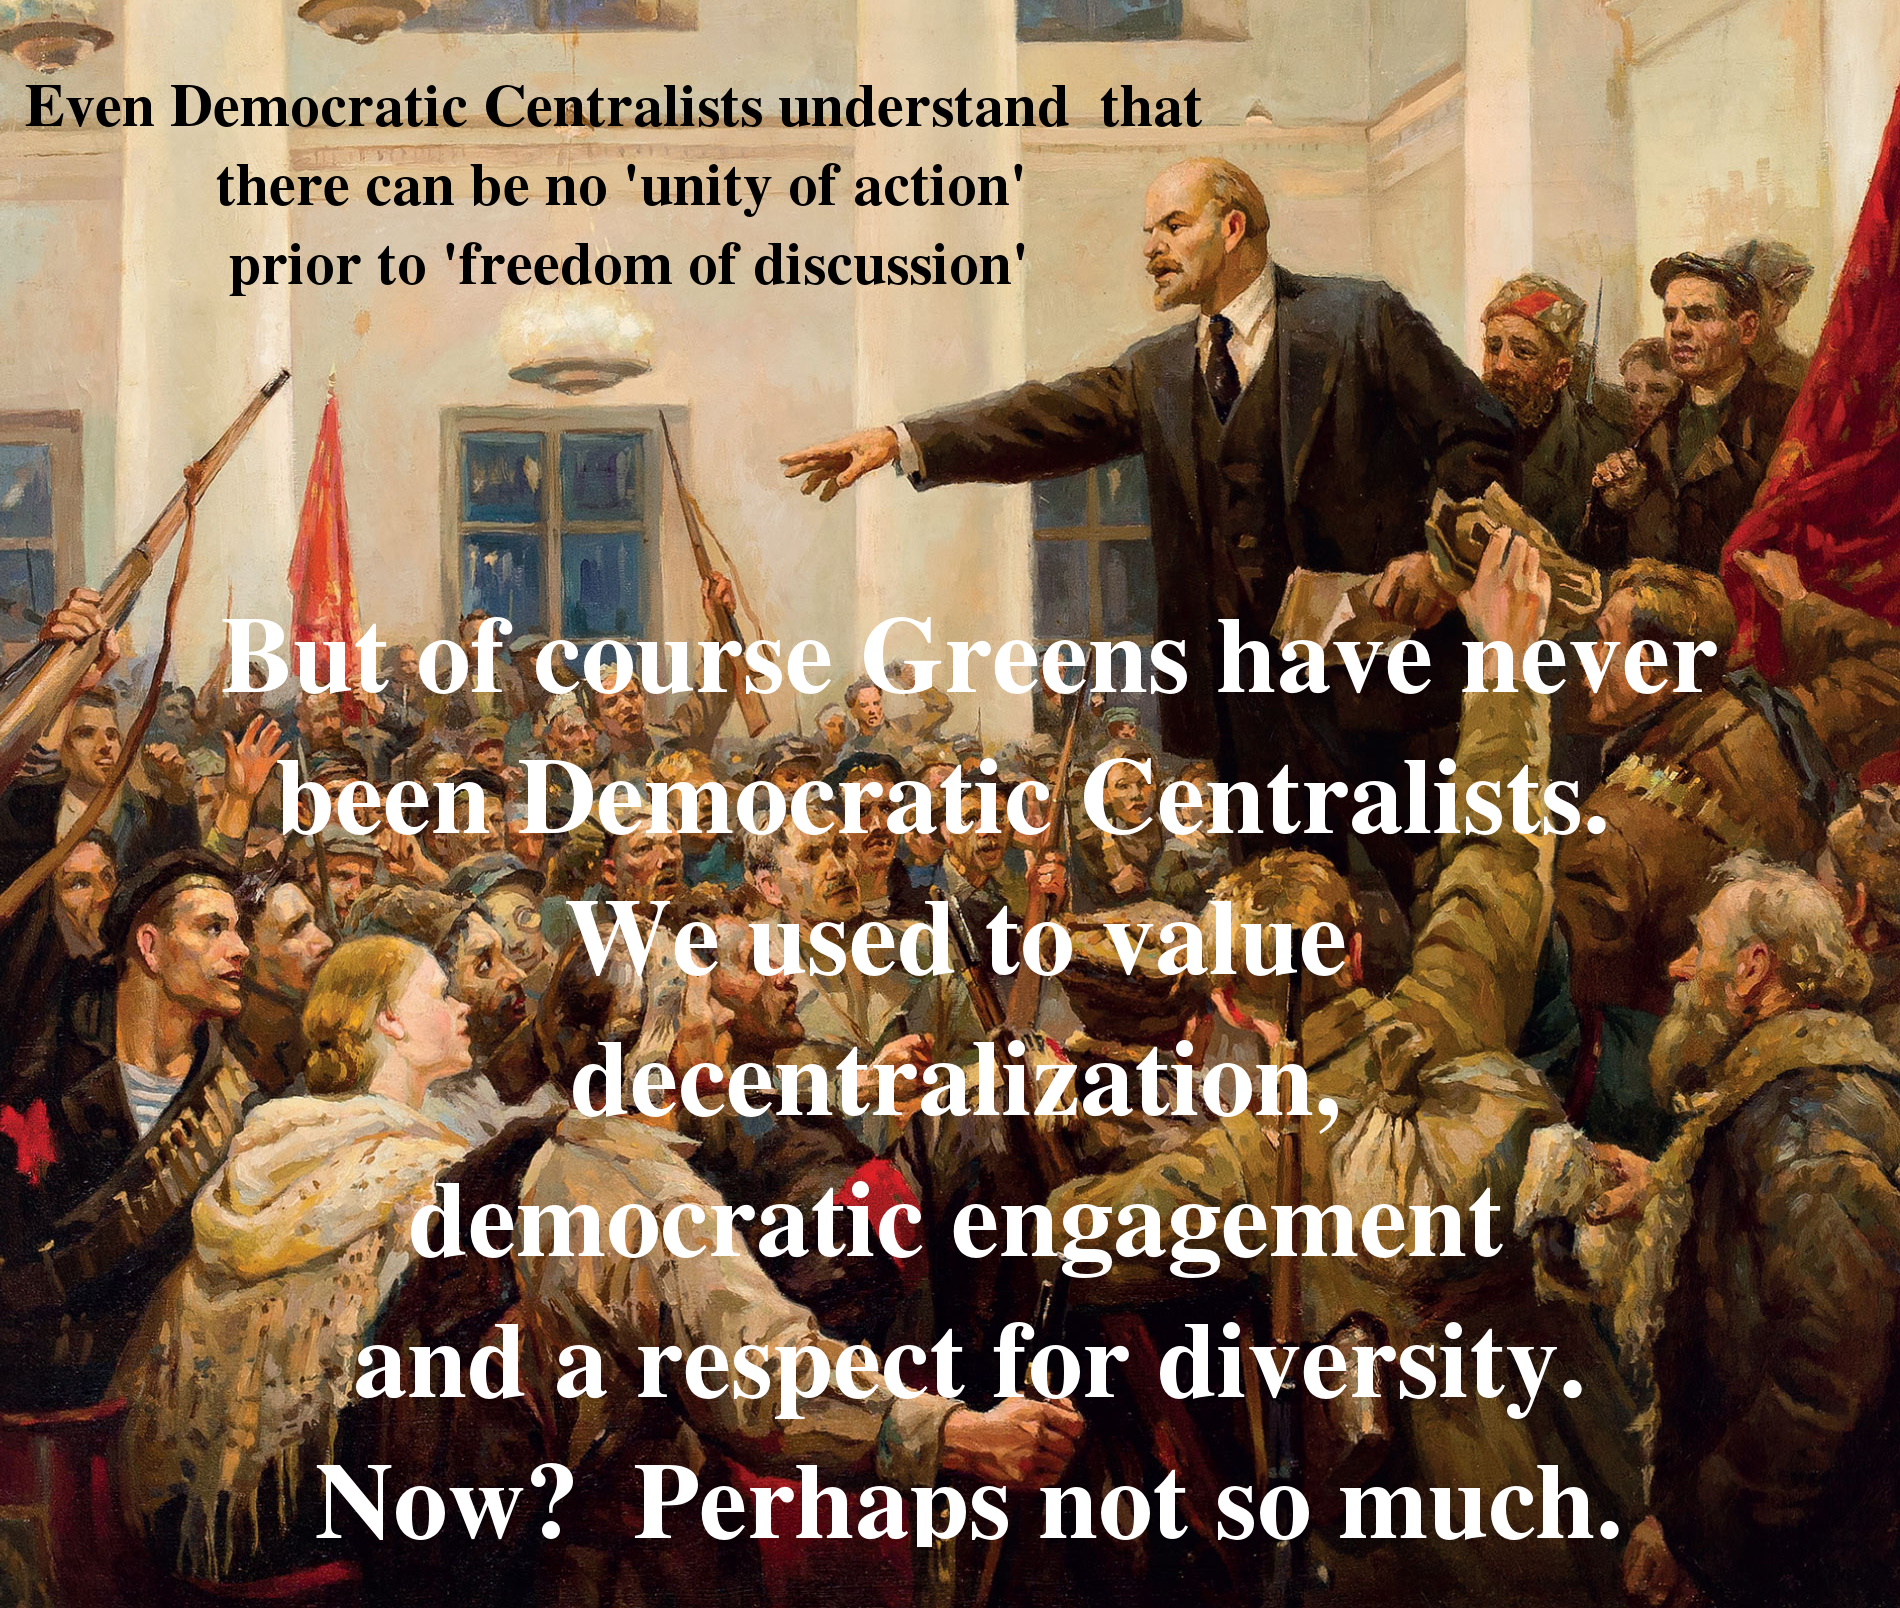 Greens are not Democratic Centralists, never have been.